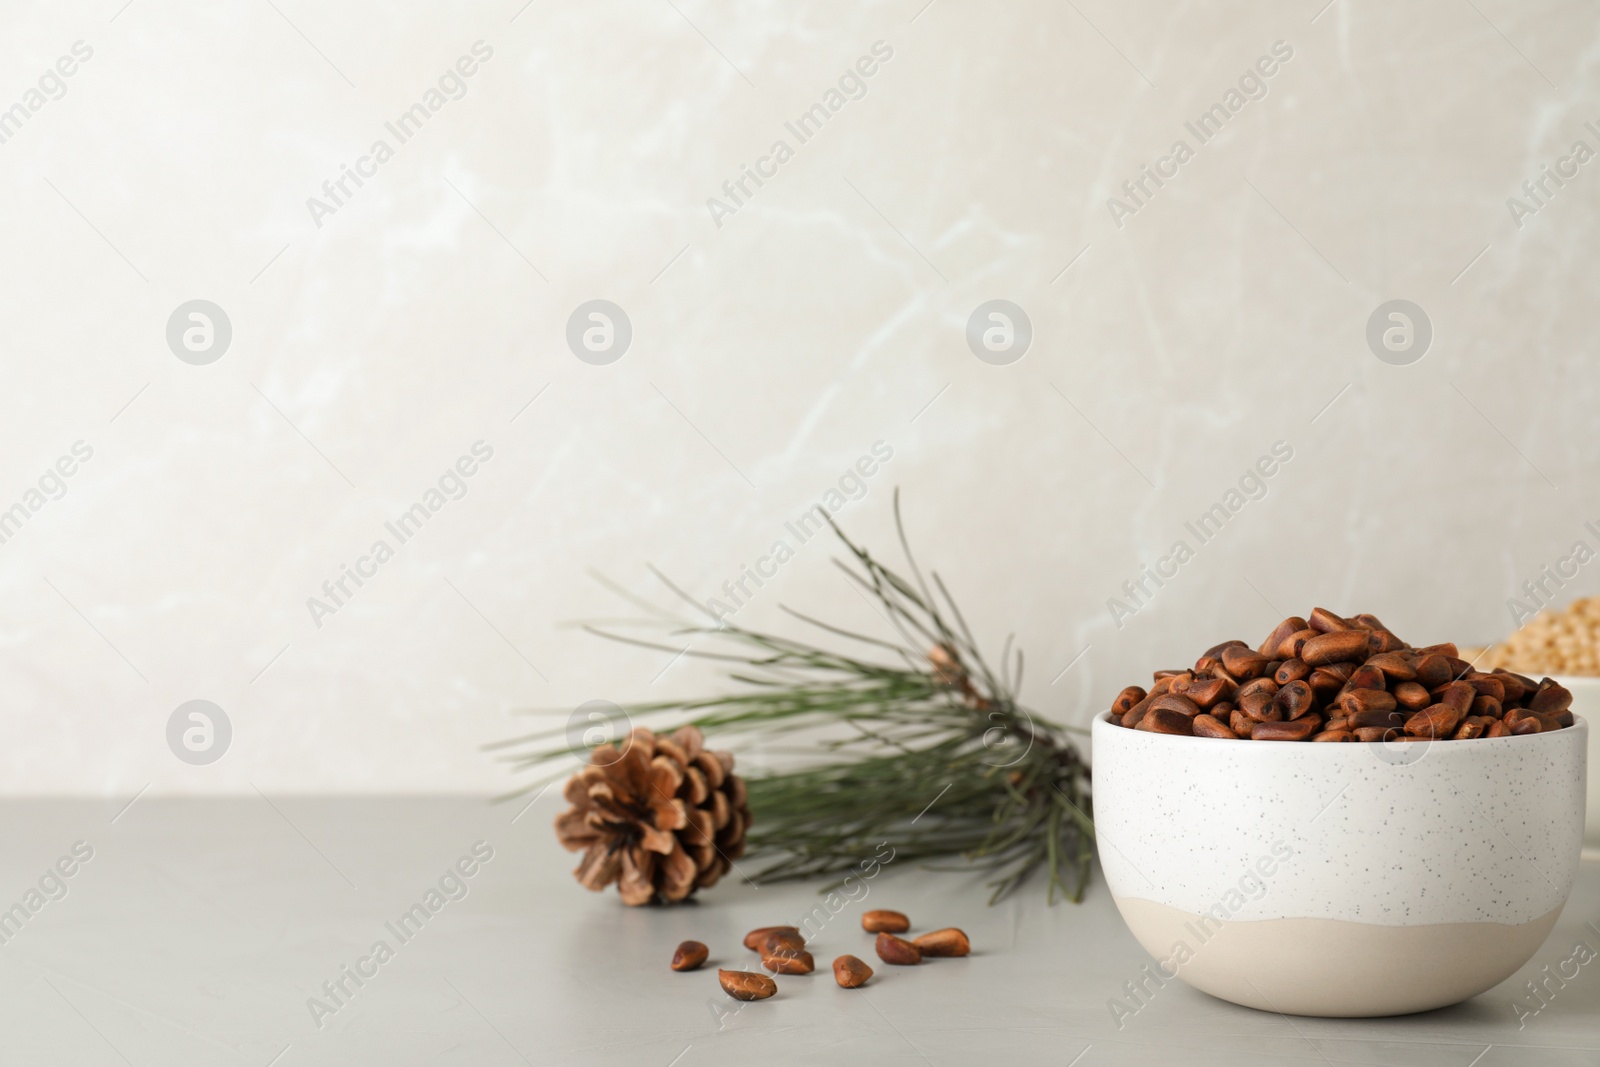 Photo of Bowl with pine nuts on table against light background. Space for text